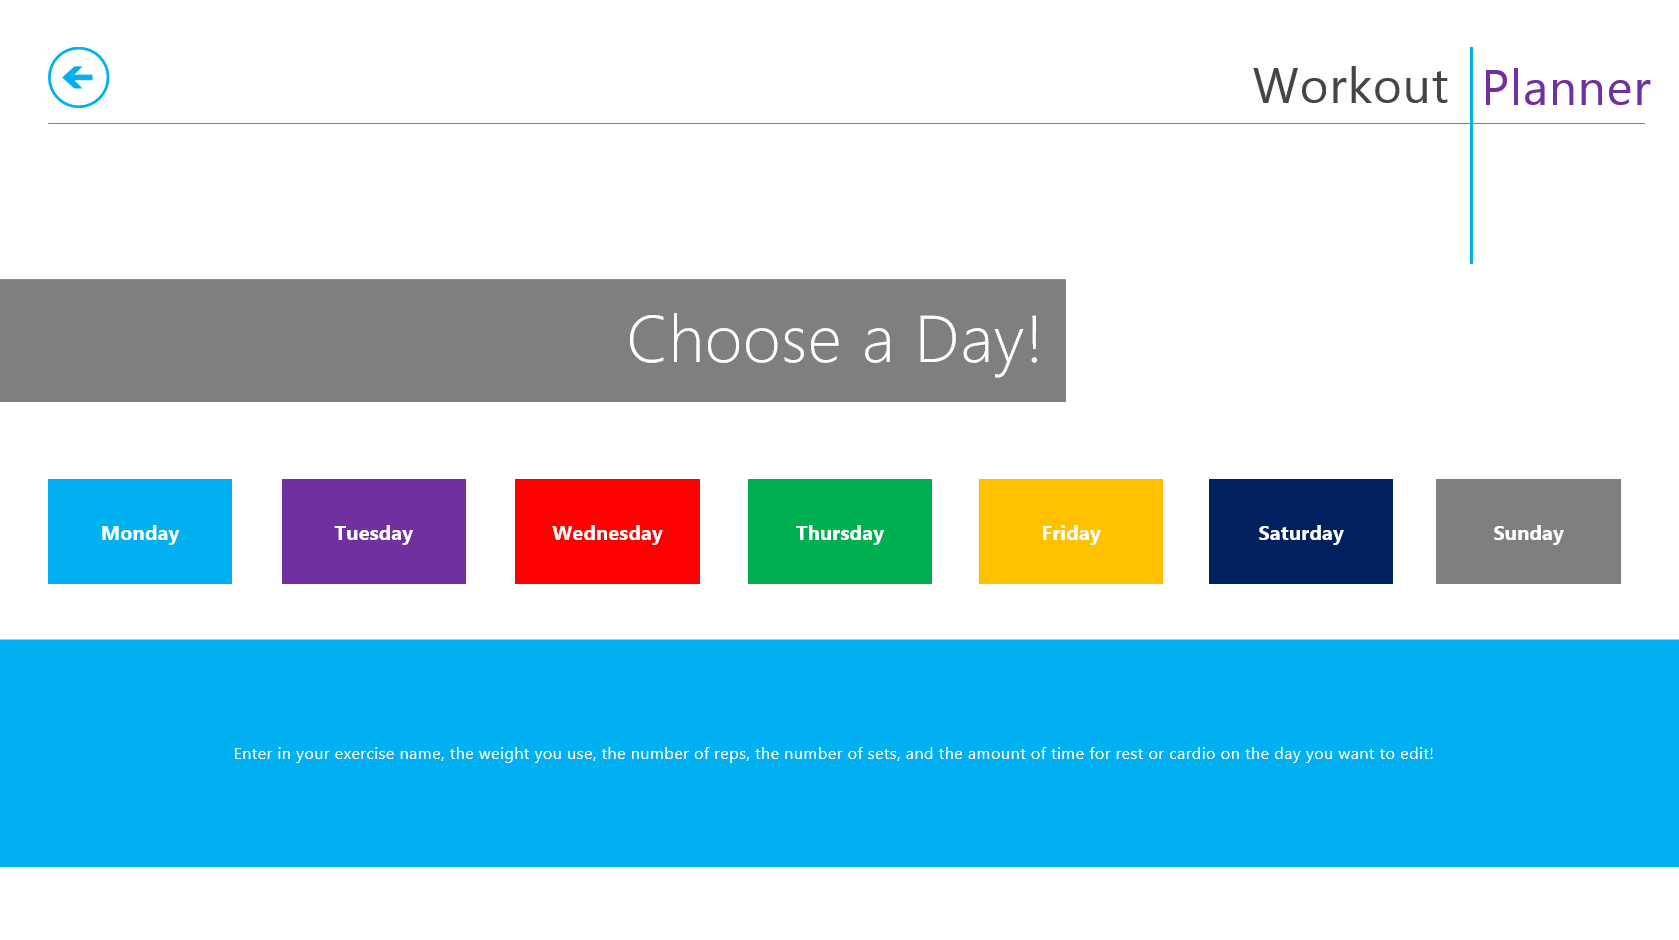 Choose a day!